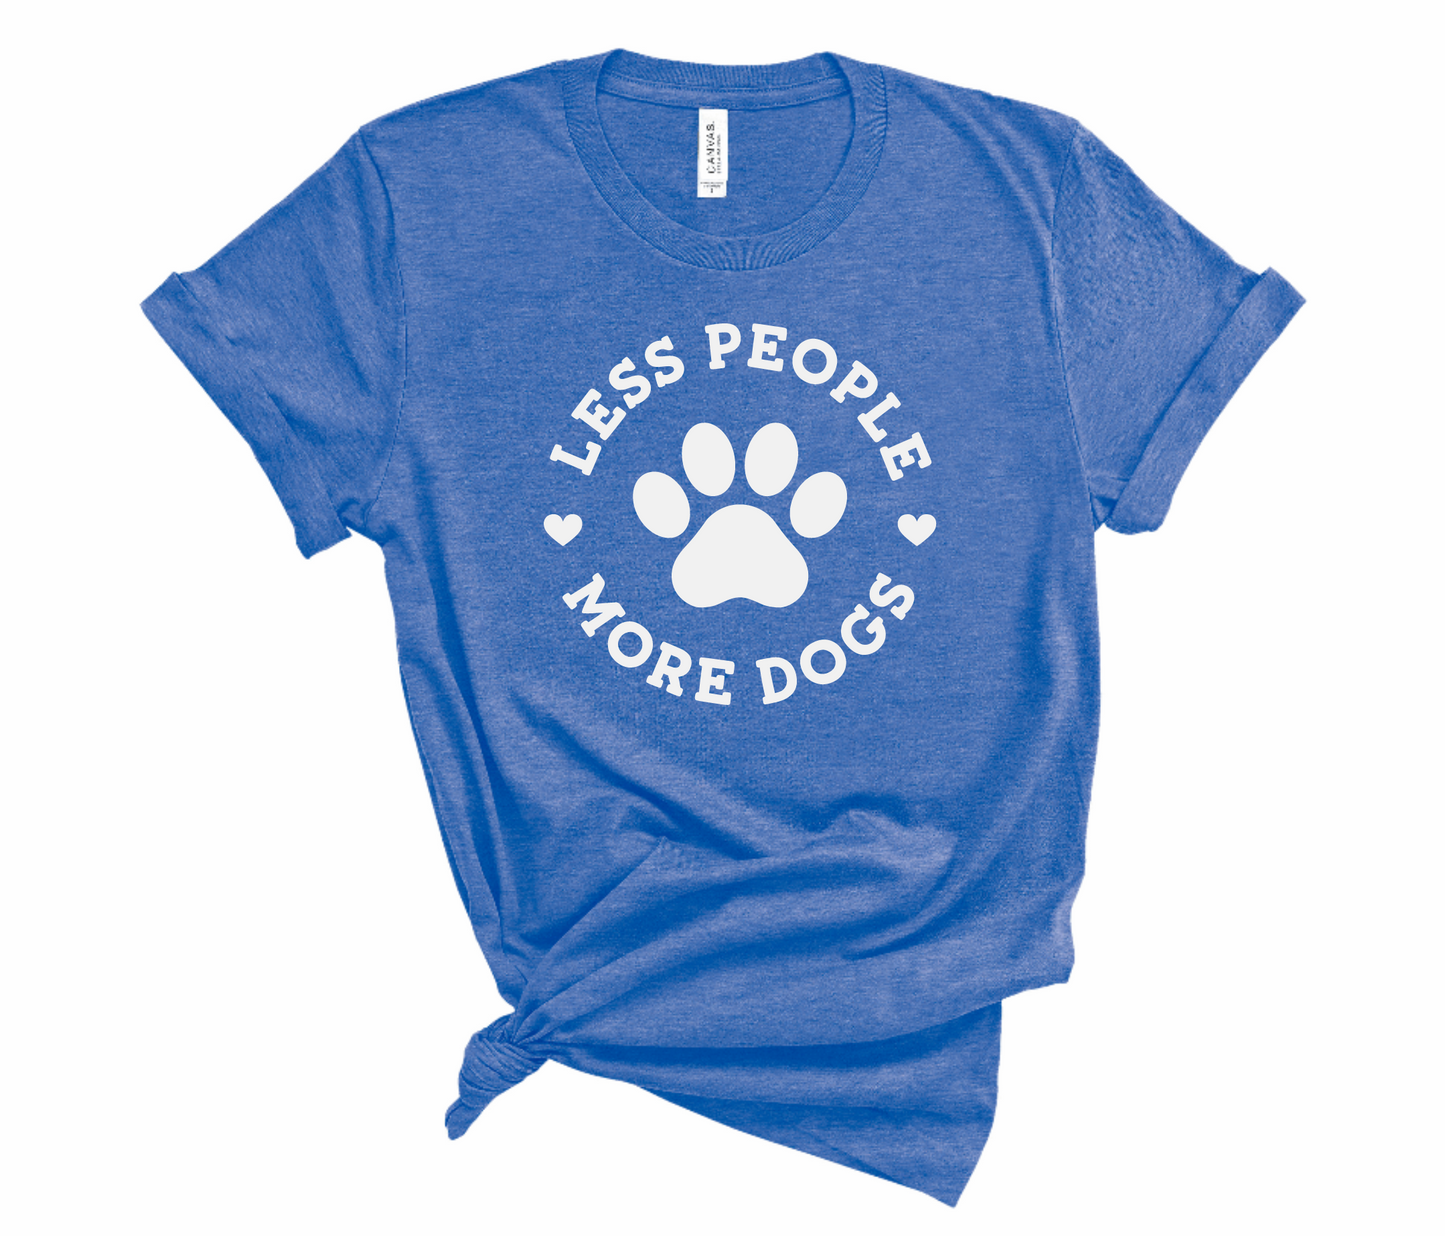 Less People, More Dogs Tshirt